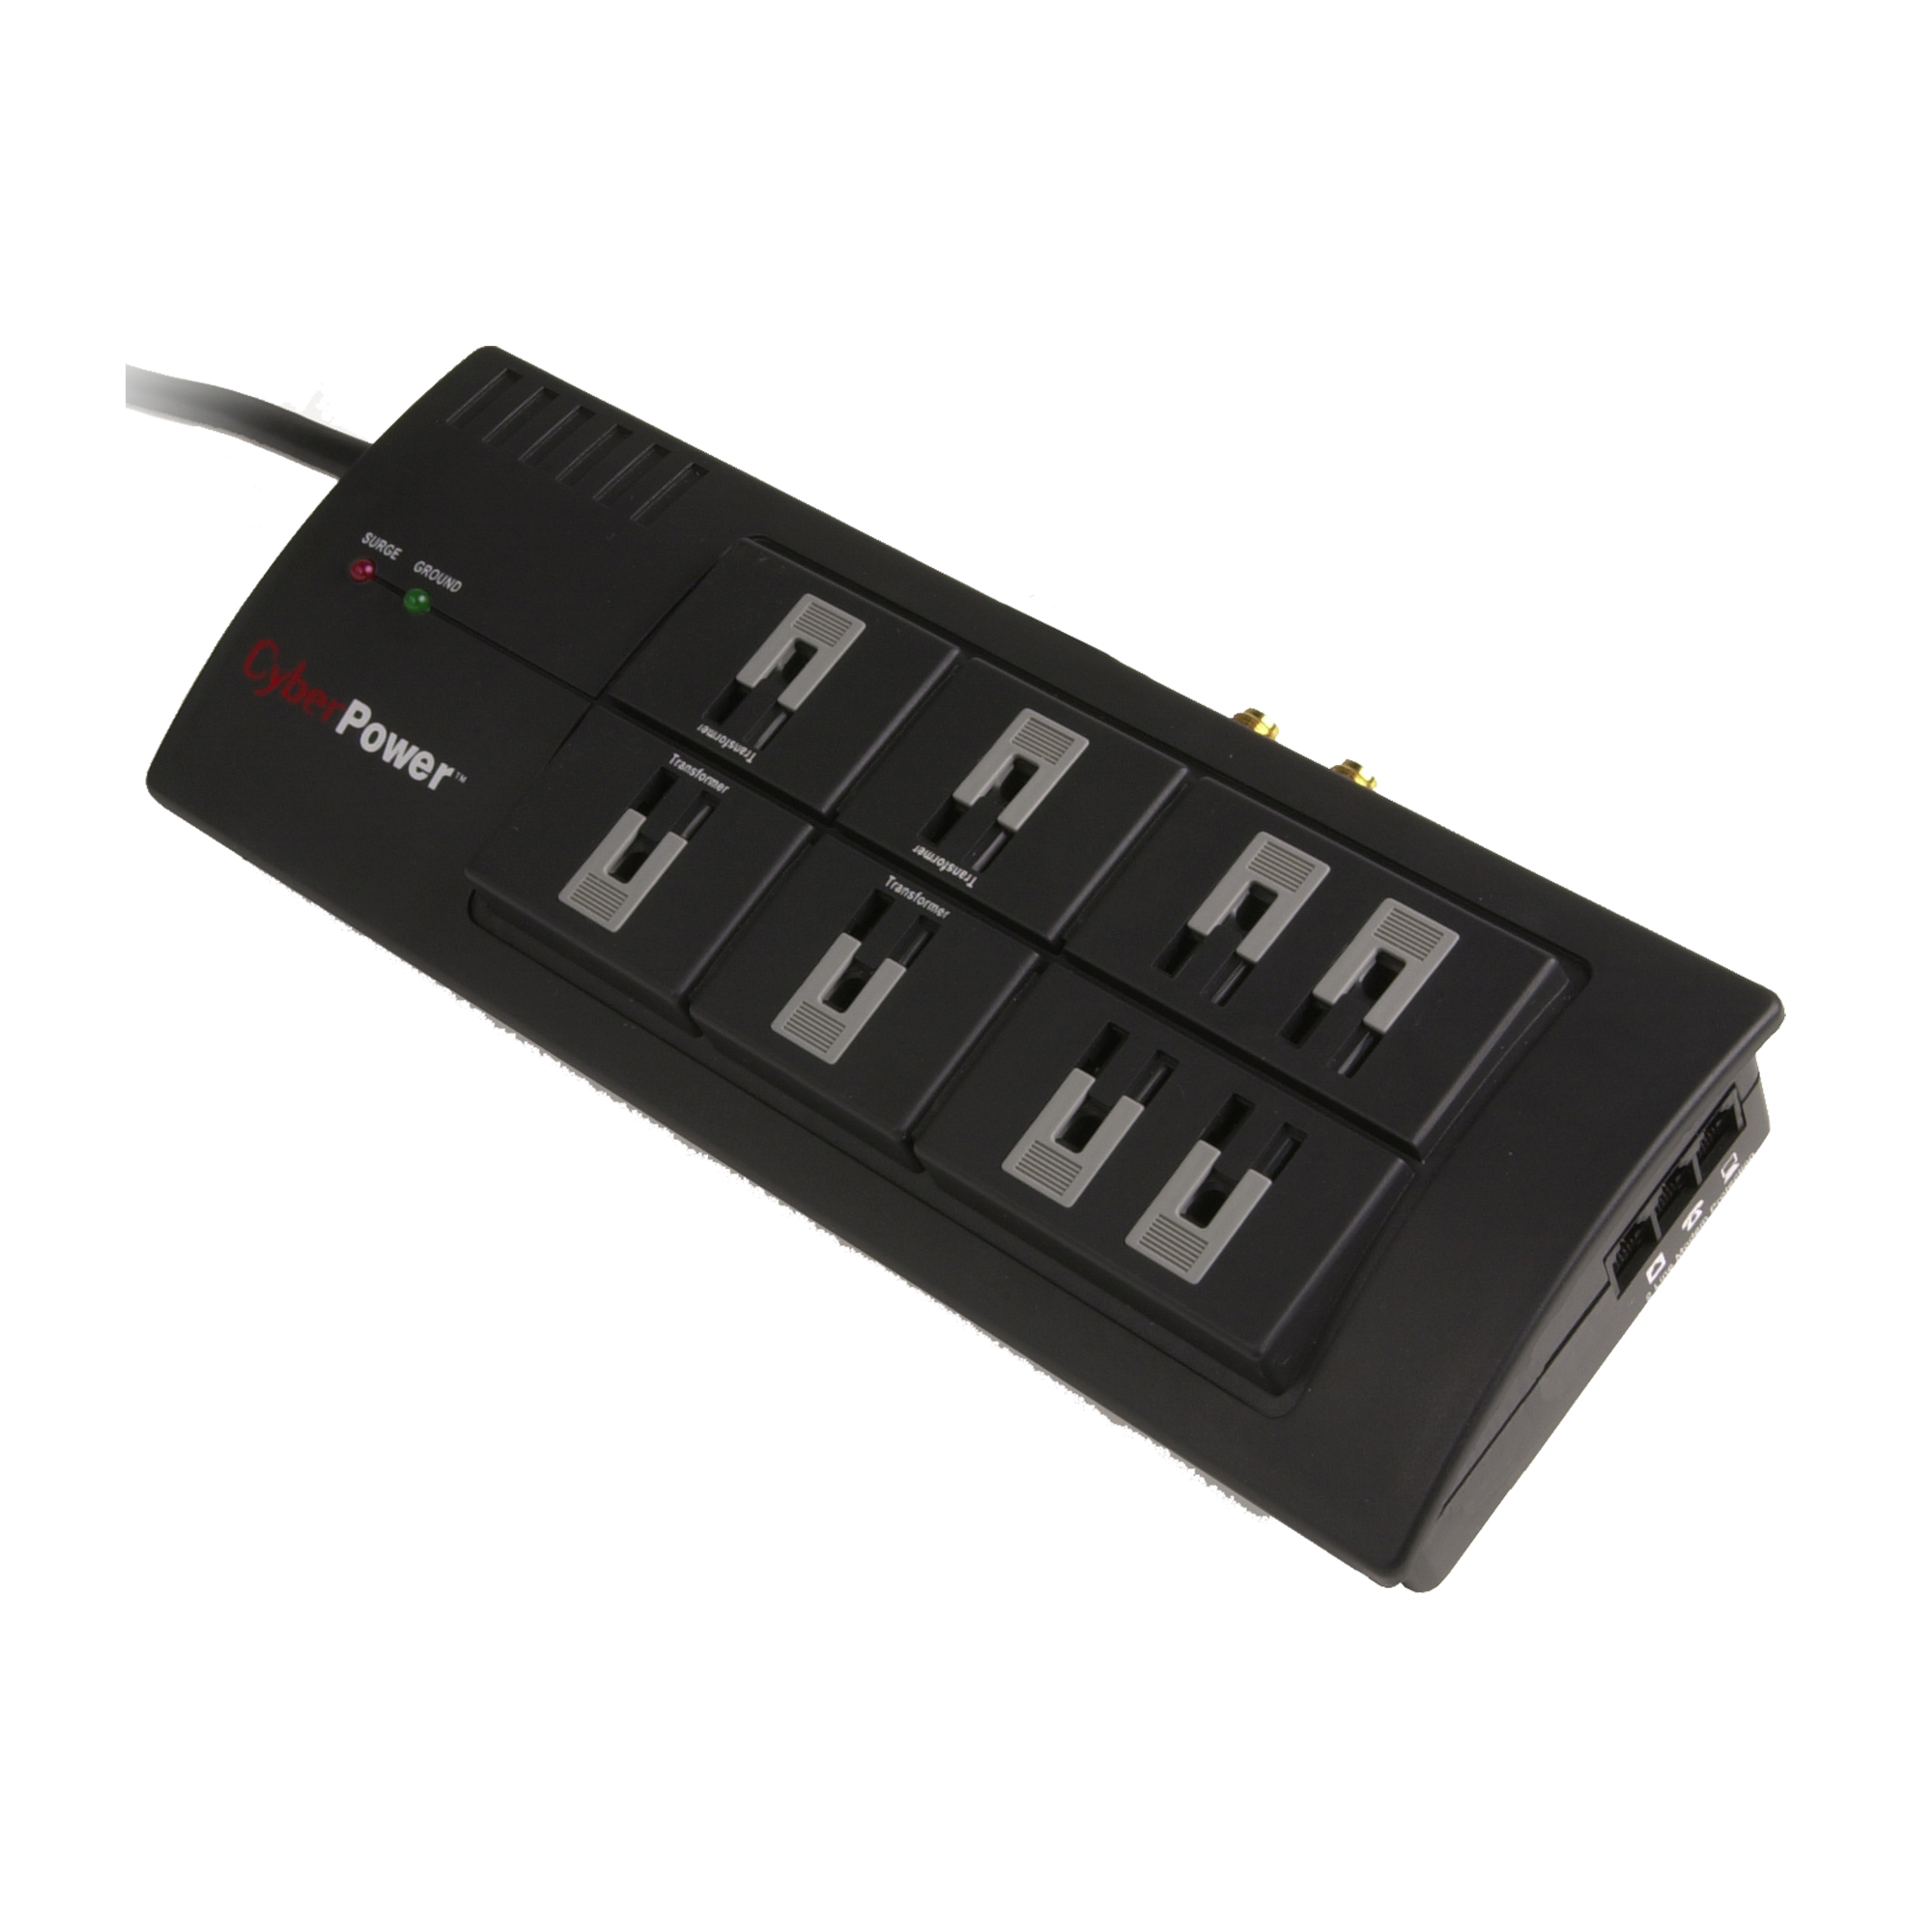 Cyber POWER Model 880 Surge Protector 